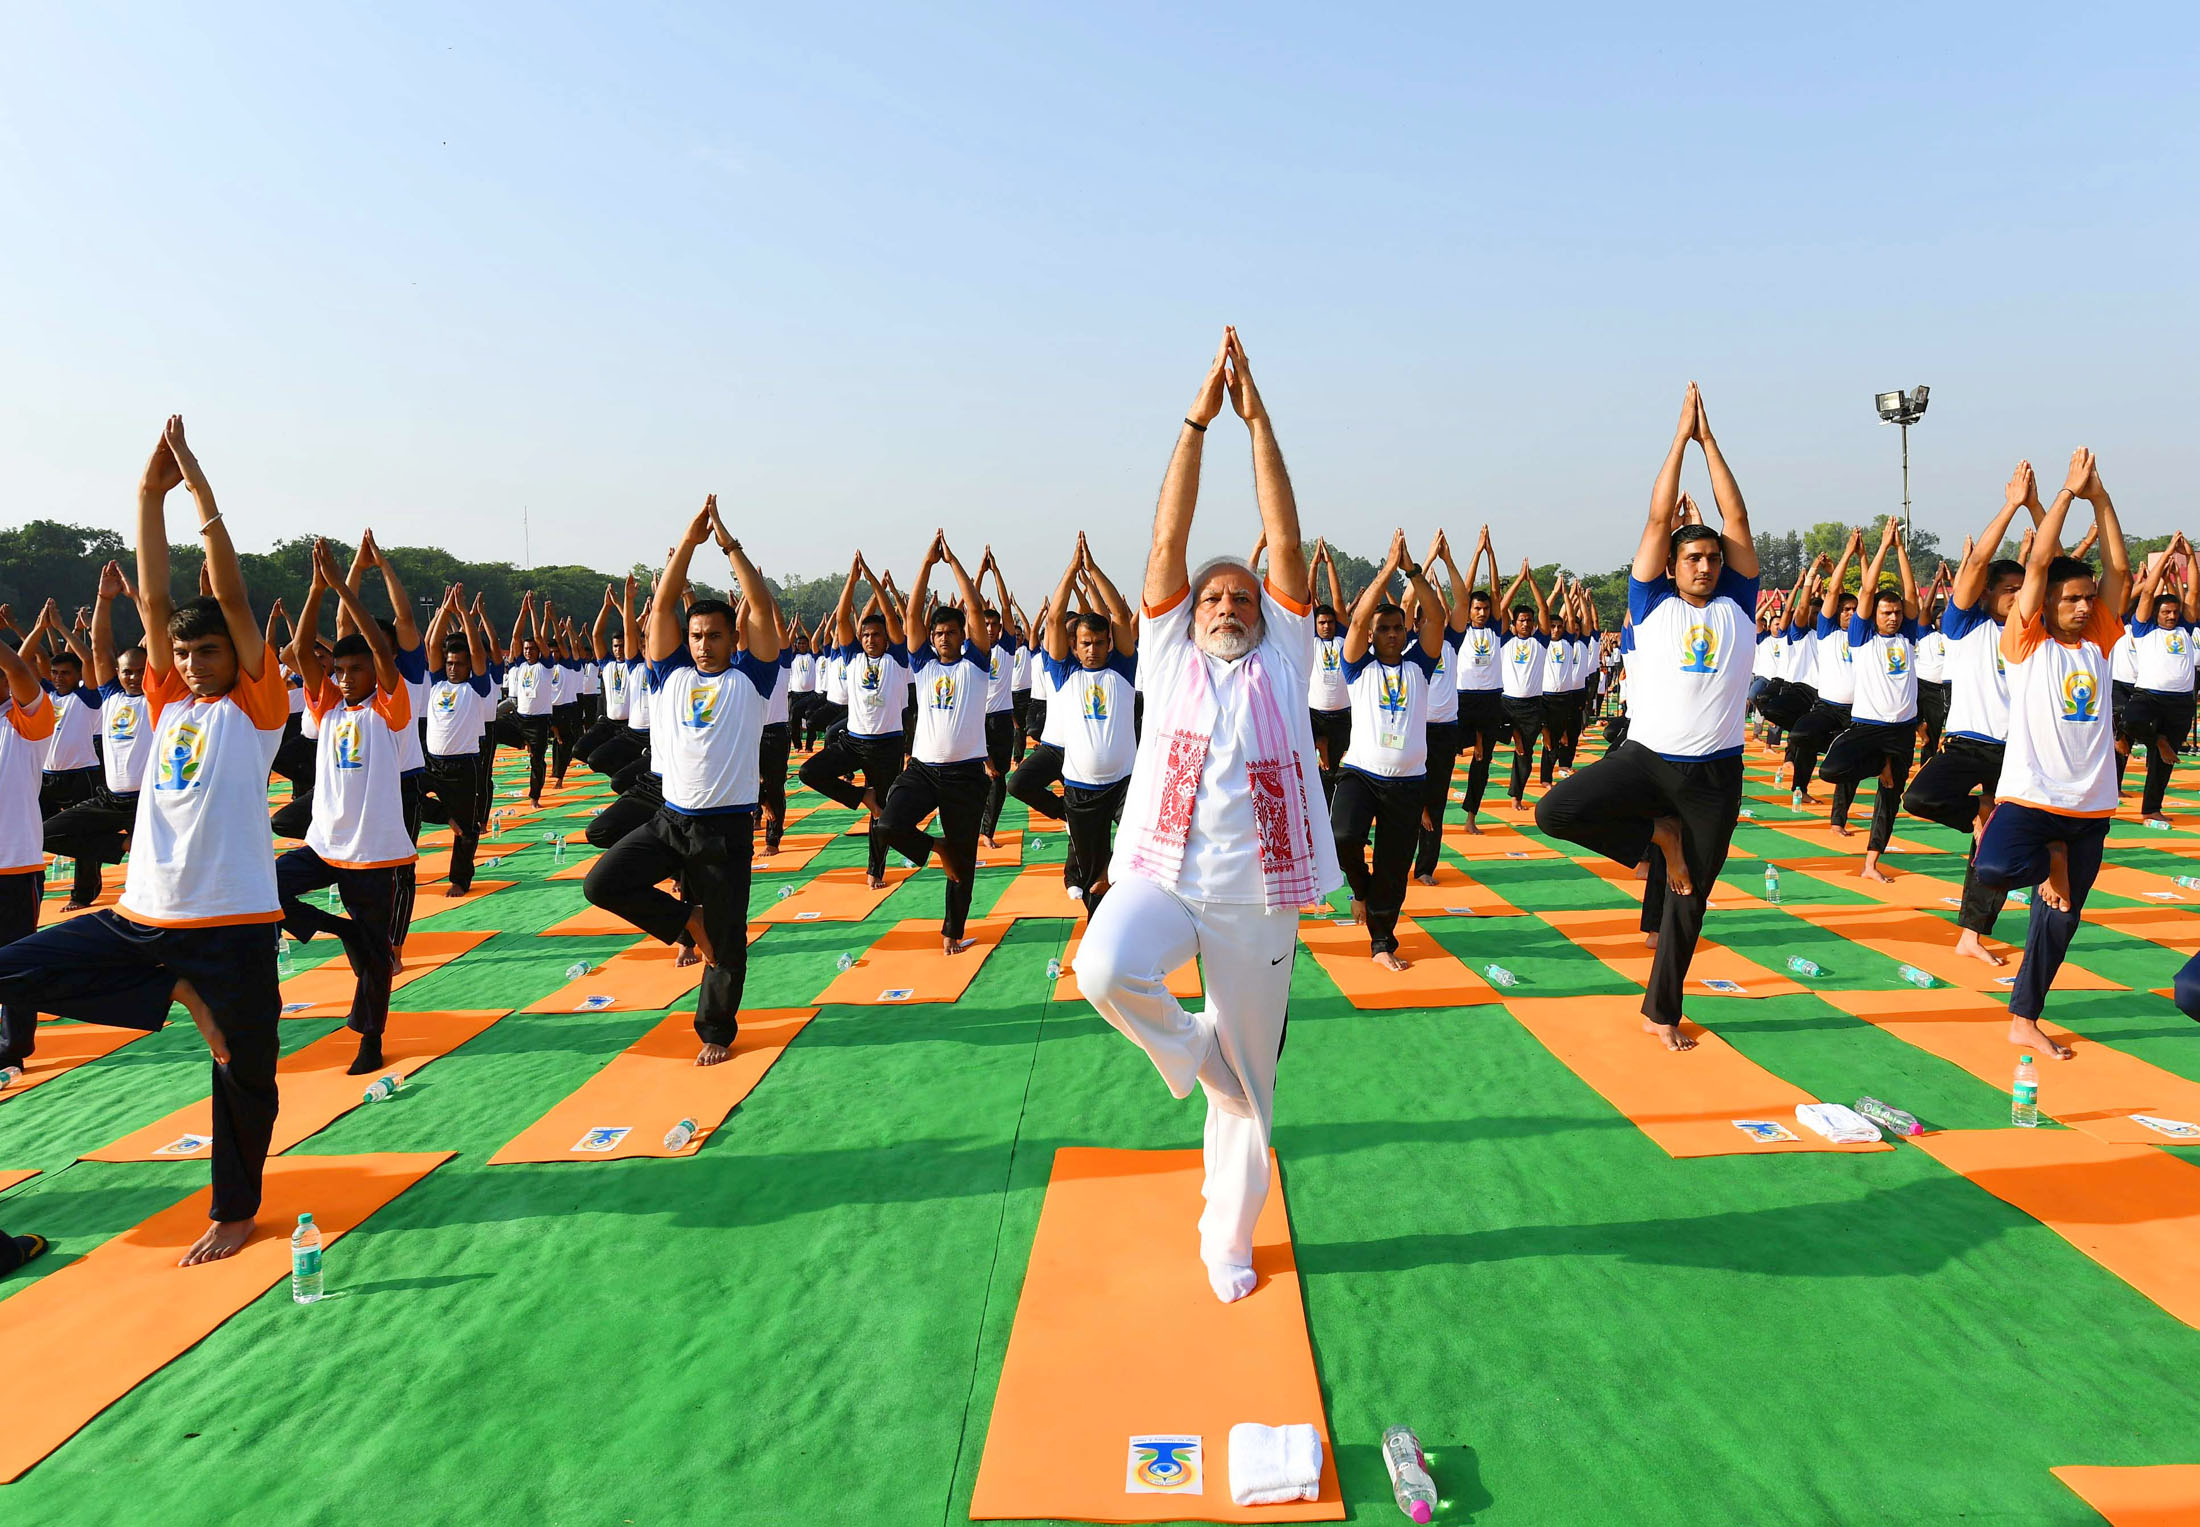 The Prime Minister, Shri Narendra Modi participates in the mass yoga demonstration, on the occasion of the 4th International Day of Yoga 2018, at the Forest Research Institute, in Dehradun, Uttarakhand on June 21, 2018.